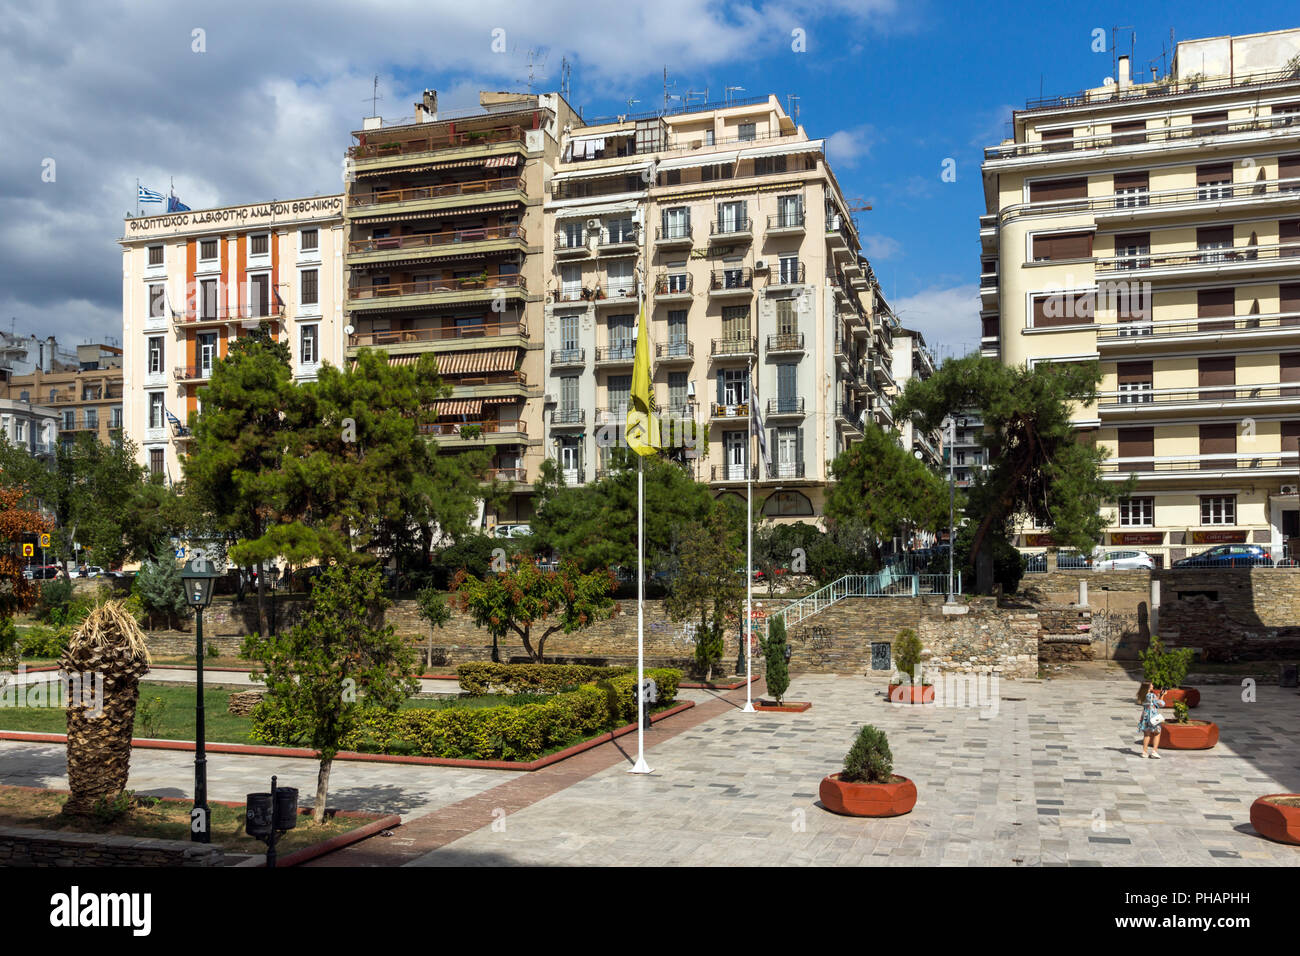 THESSALONIKI, GREECE - SEPTEMBER 30, 2017:  Amazing view of Agia Sofia Square in city of Thessaloniki, Central Macedonia, Greece Stock Photo